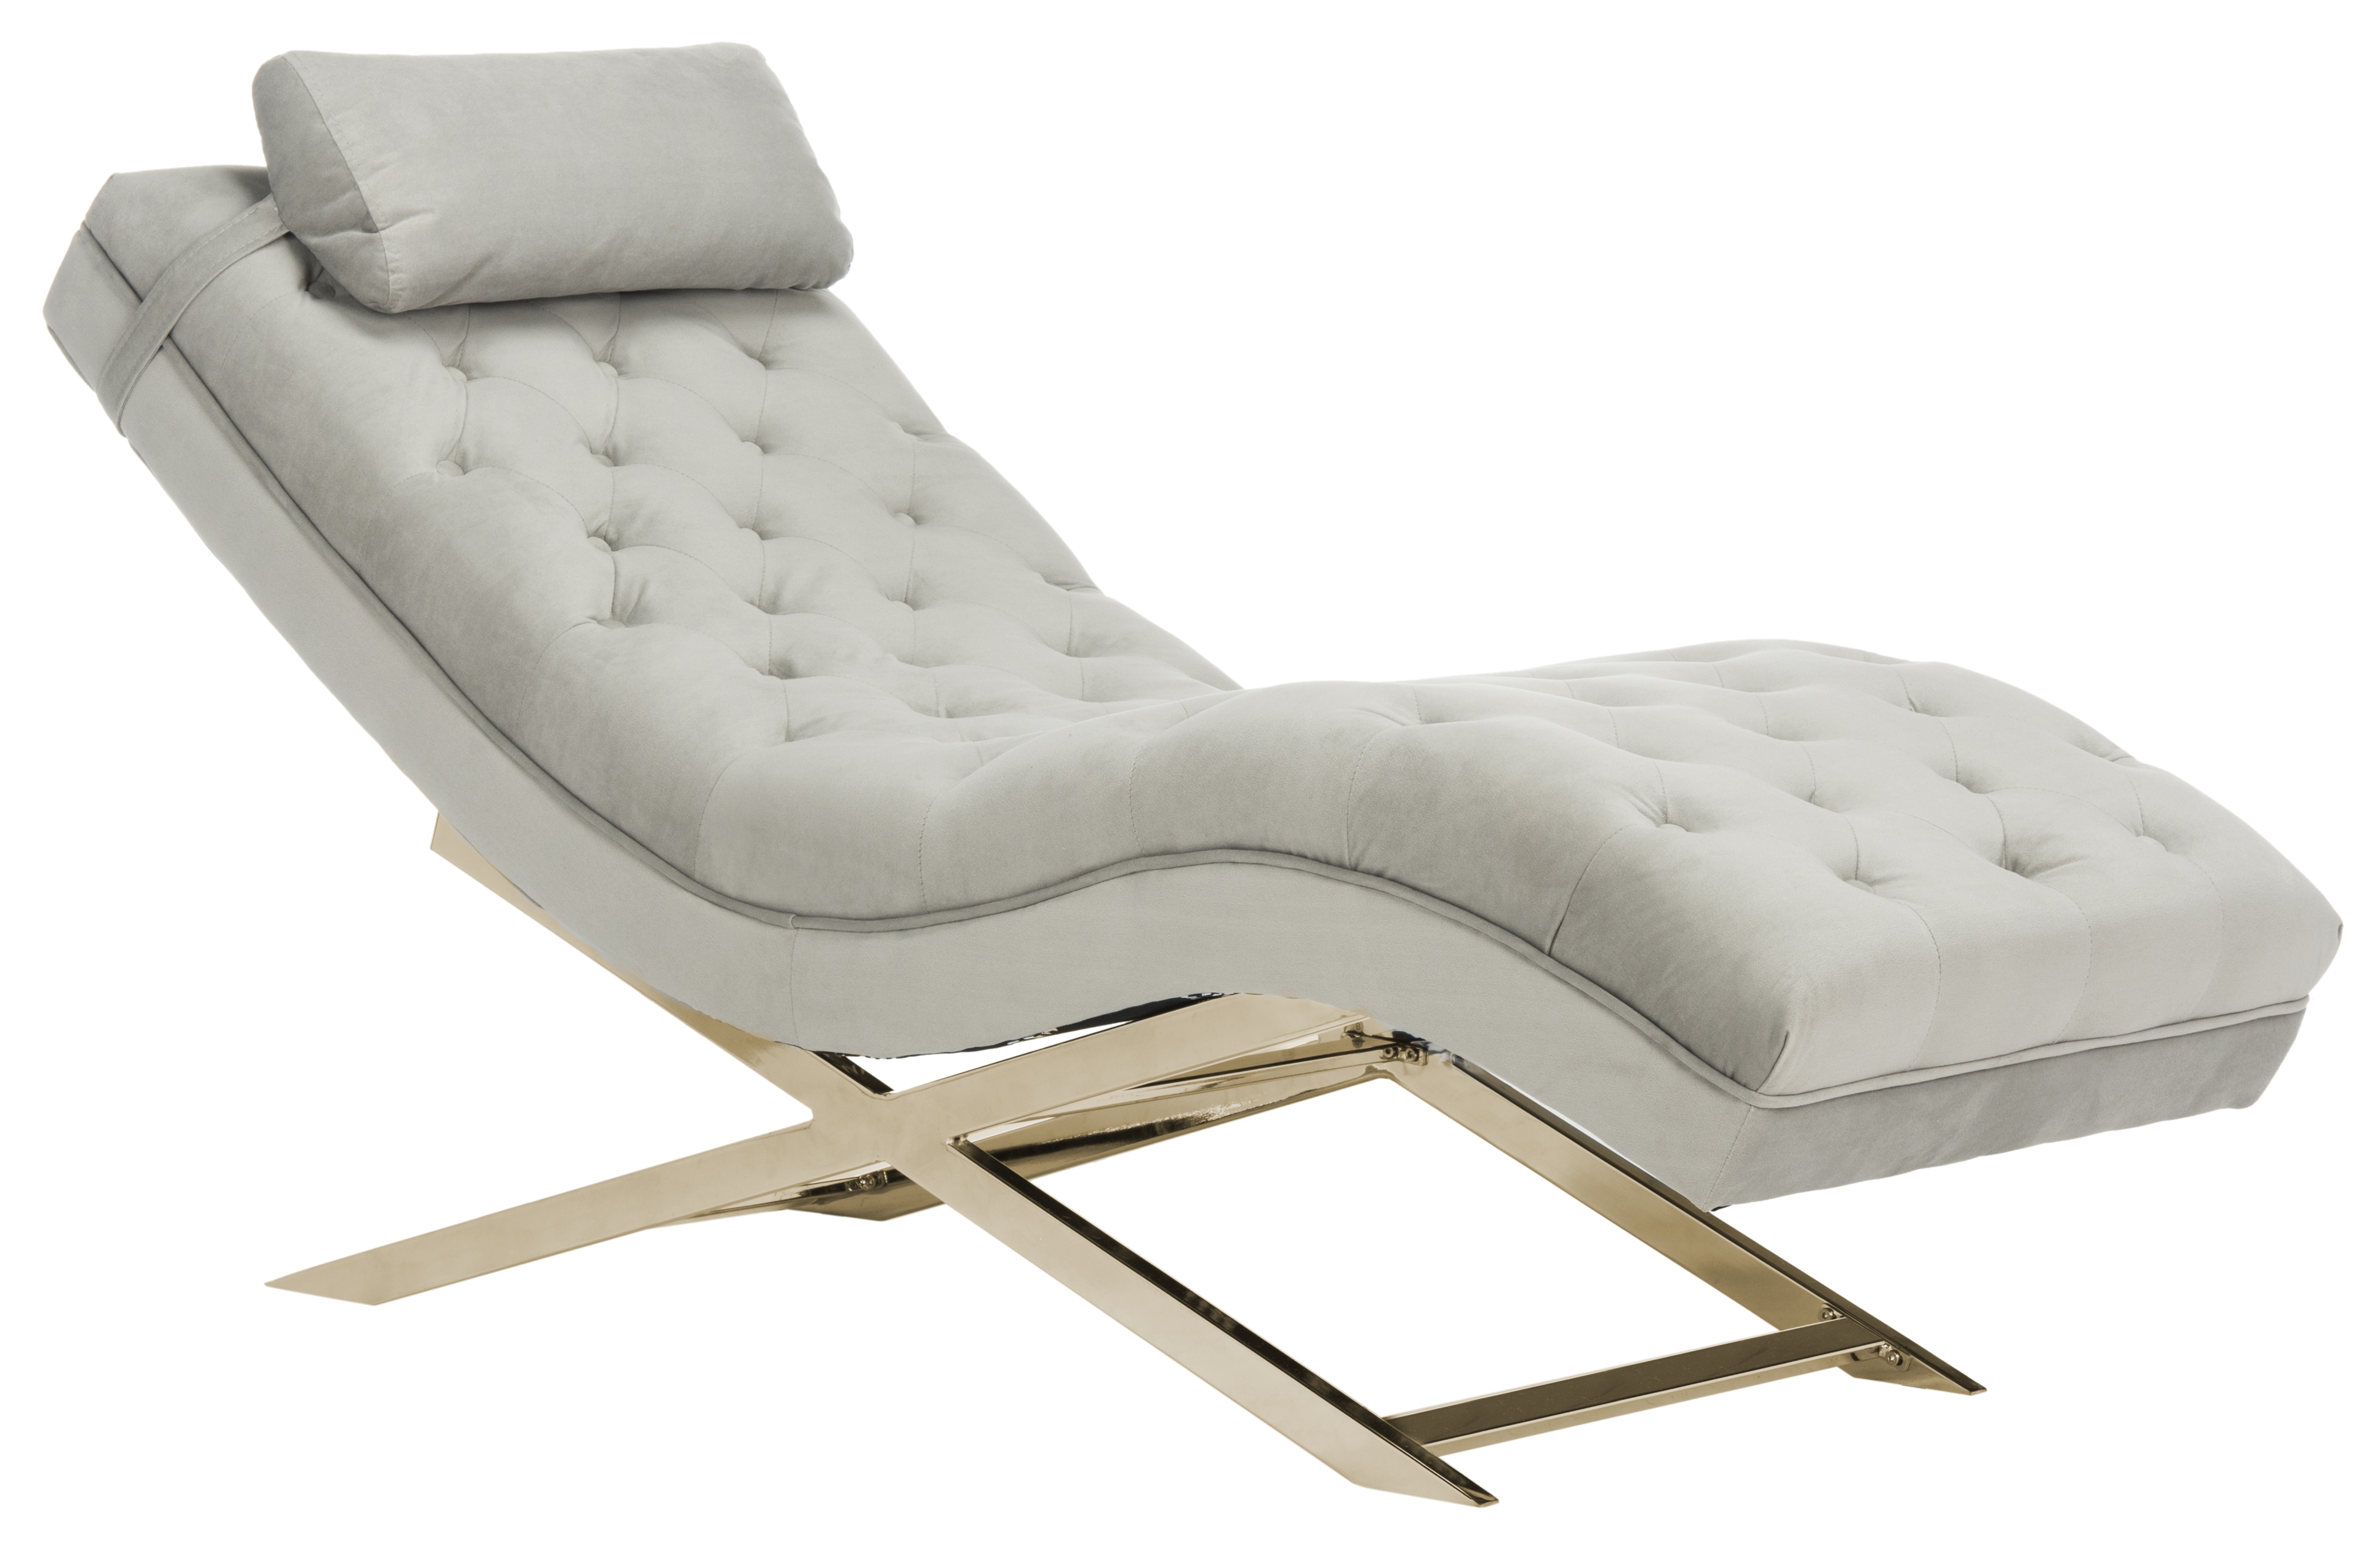 Monroe Chaise W/ Round Pillow - Grey/Gold - Arlo Home - Image 5